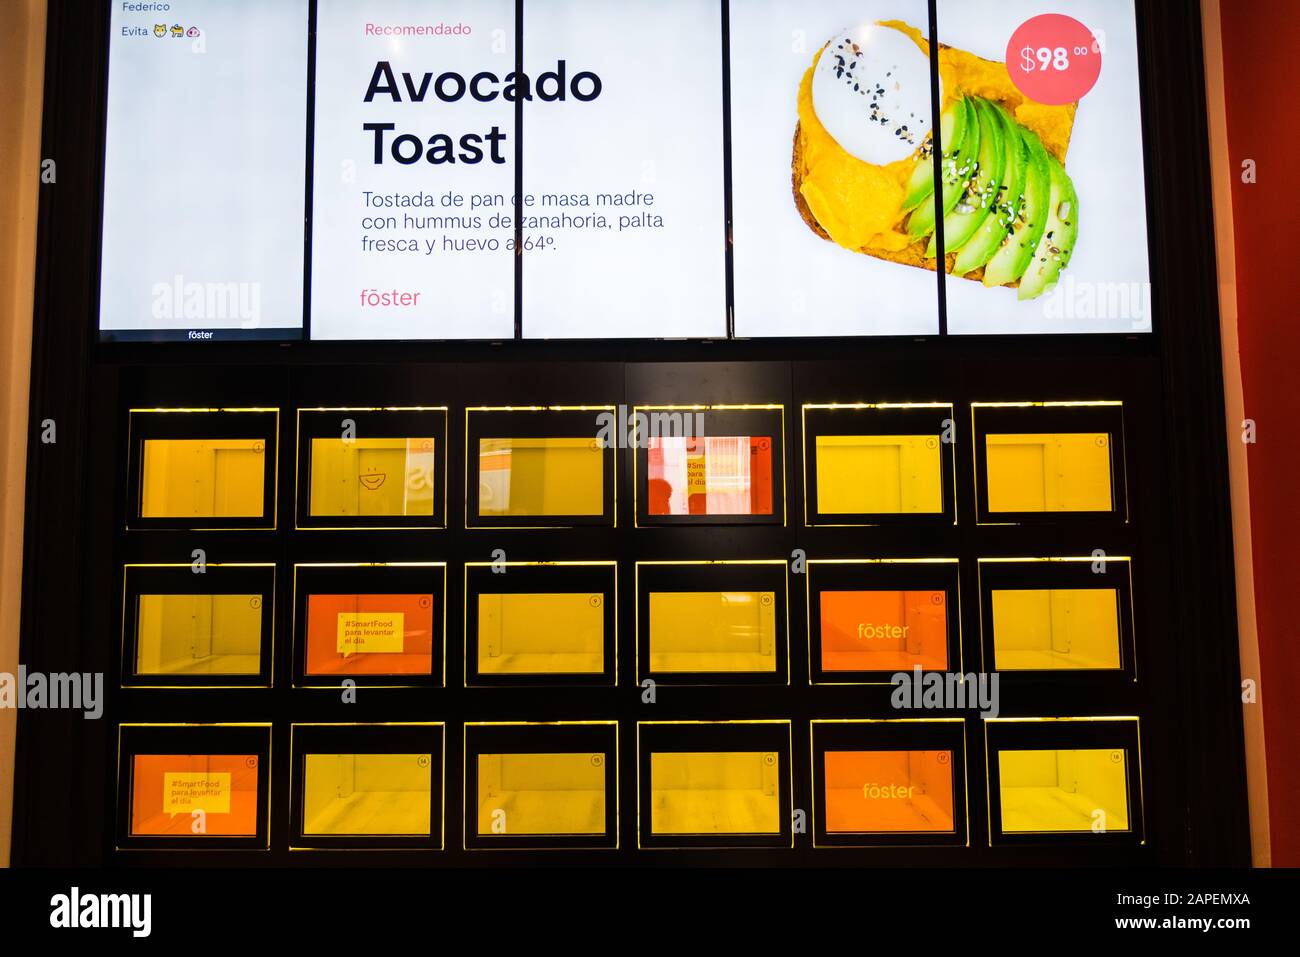 Buenos Aires, Argentina - March 21, 2019: Food compartments in automated cafe Stock Photo